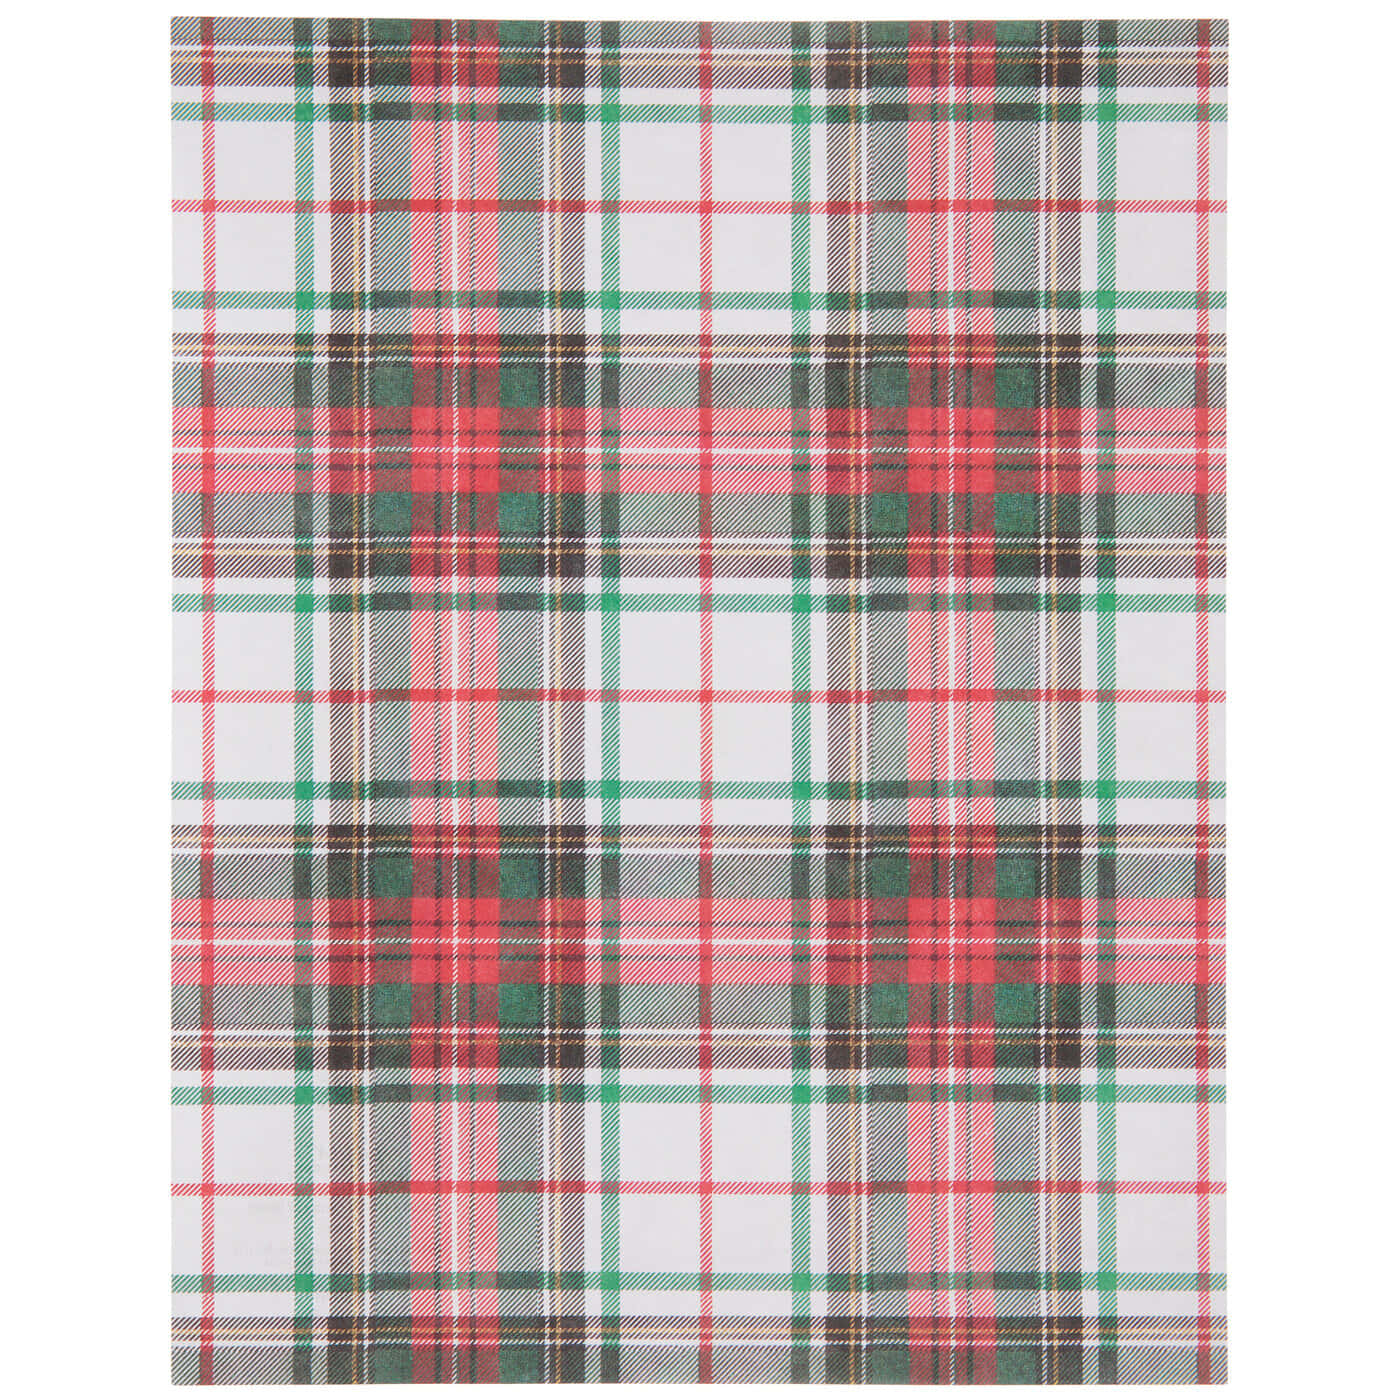 A festive Christmas pattern of red, green, and white plaid.